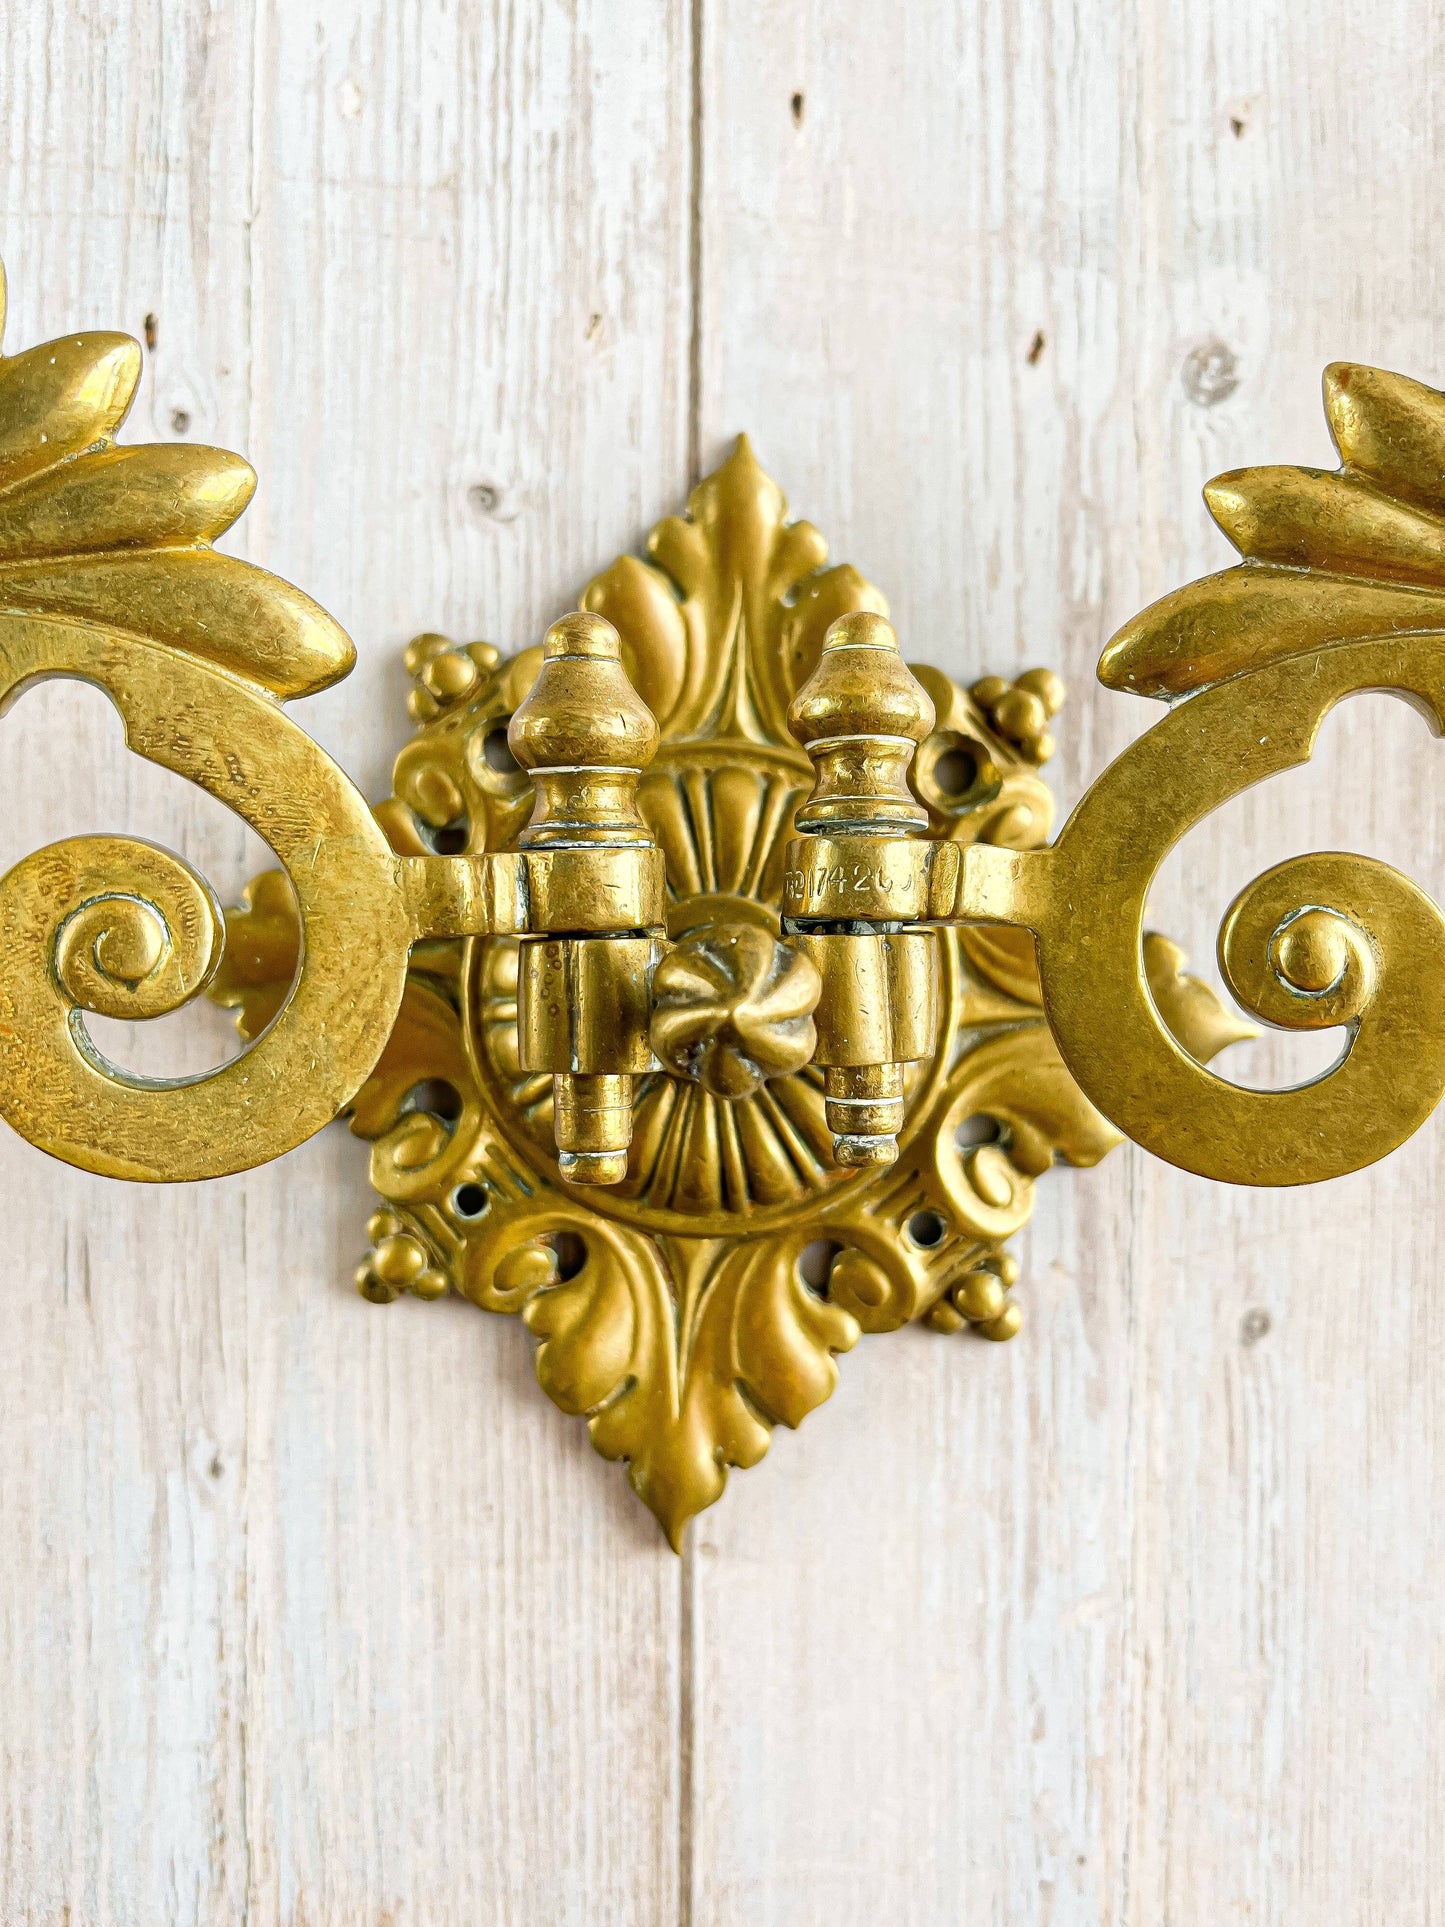 Vintage Brass Wall Sconce with Ornate Detailing - SOSC Home